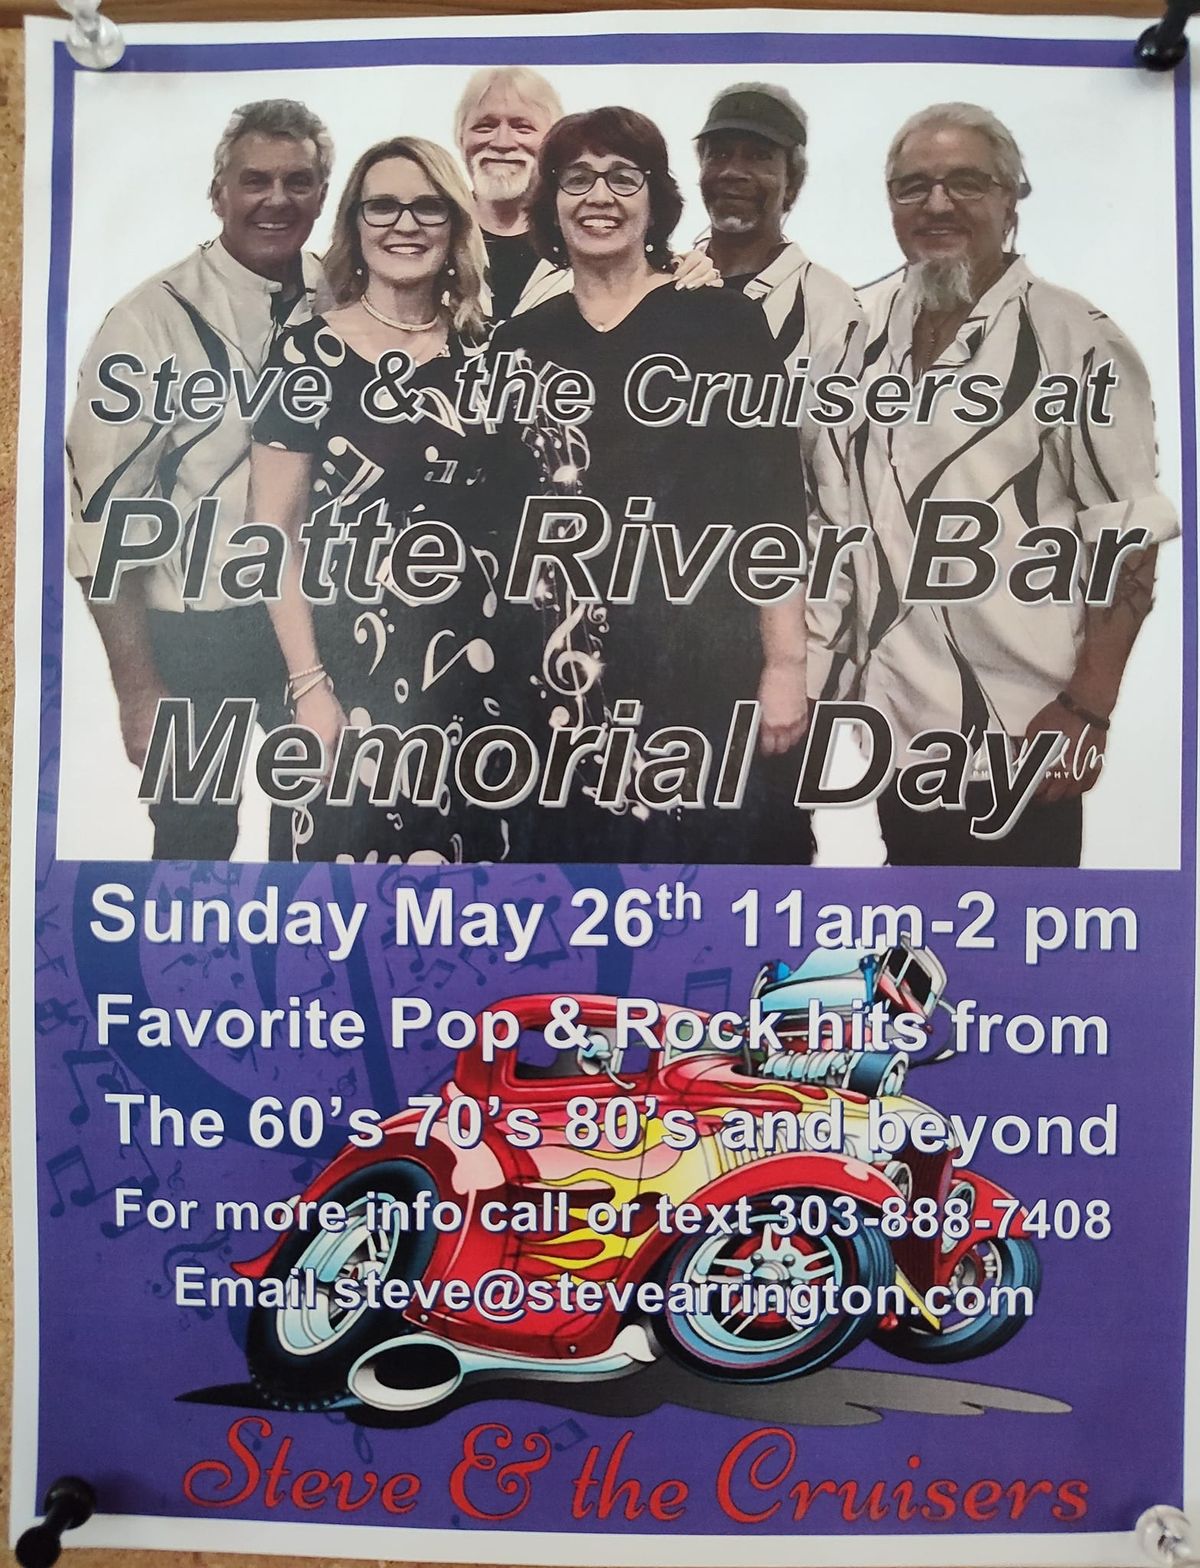 Steve & The Cruisers at Platte River Bar and Grill for Memorial Day